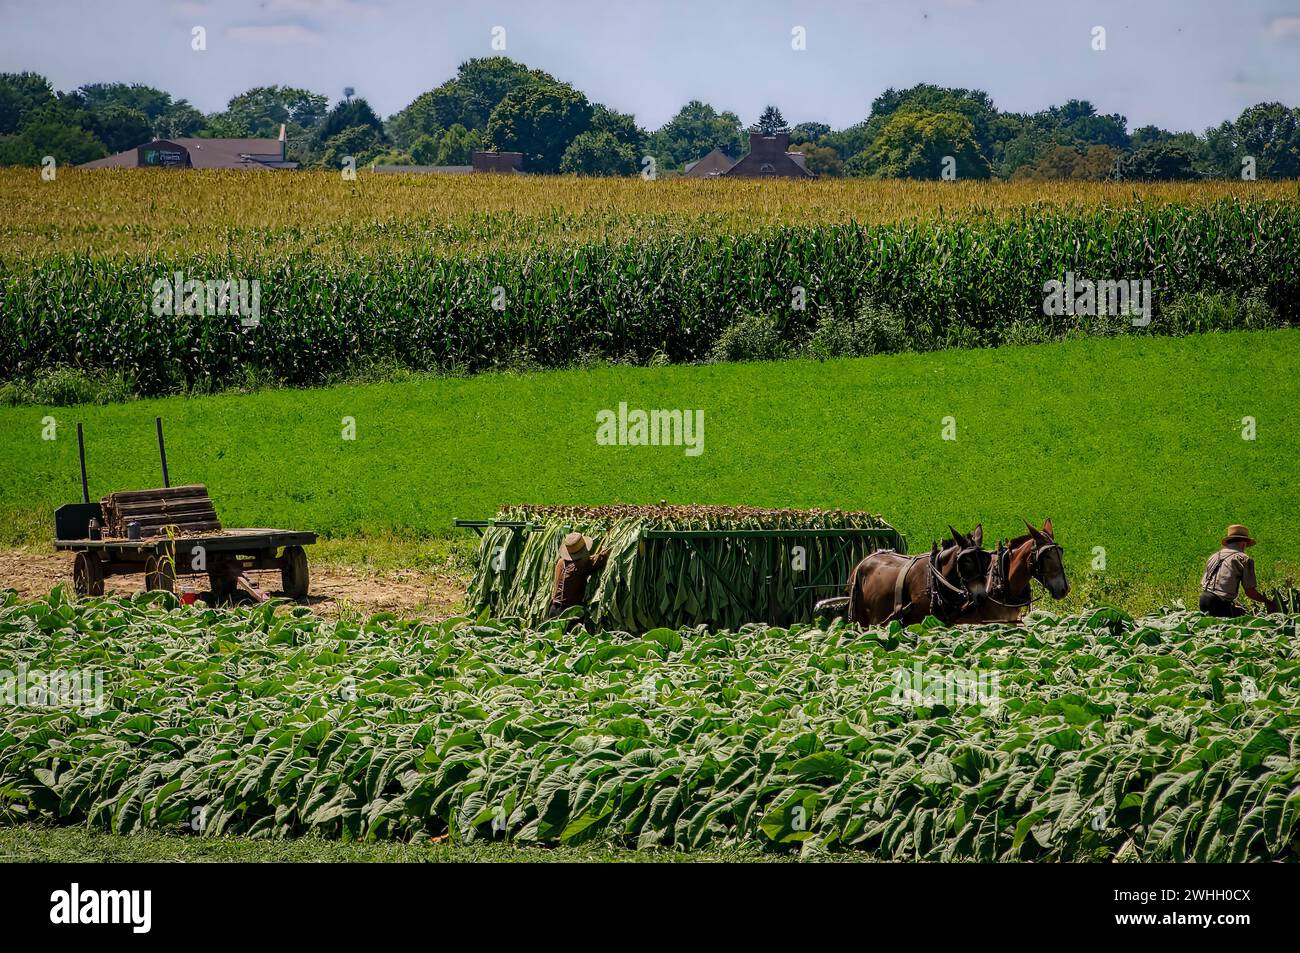 View of an Amish Man Putting Harvested Tobacco on a Wagon to Bring To Barn for Drying Stock Photo